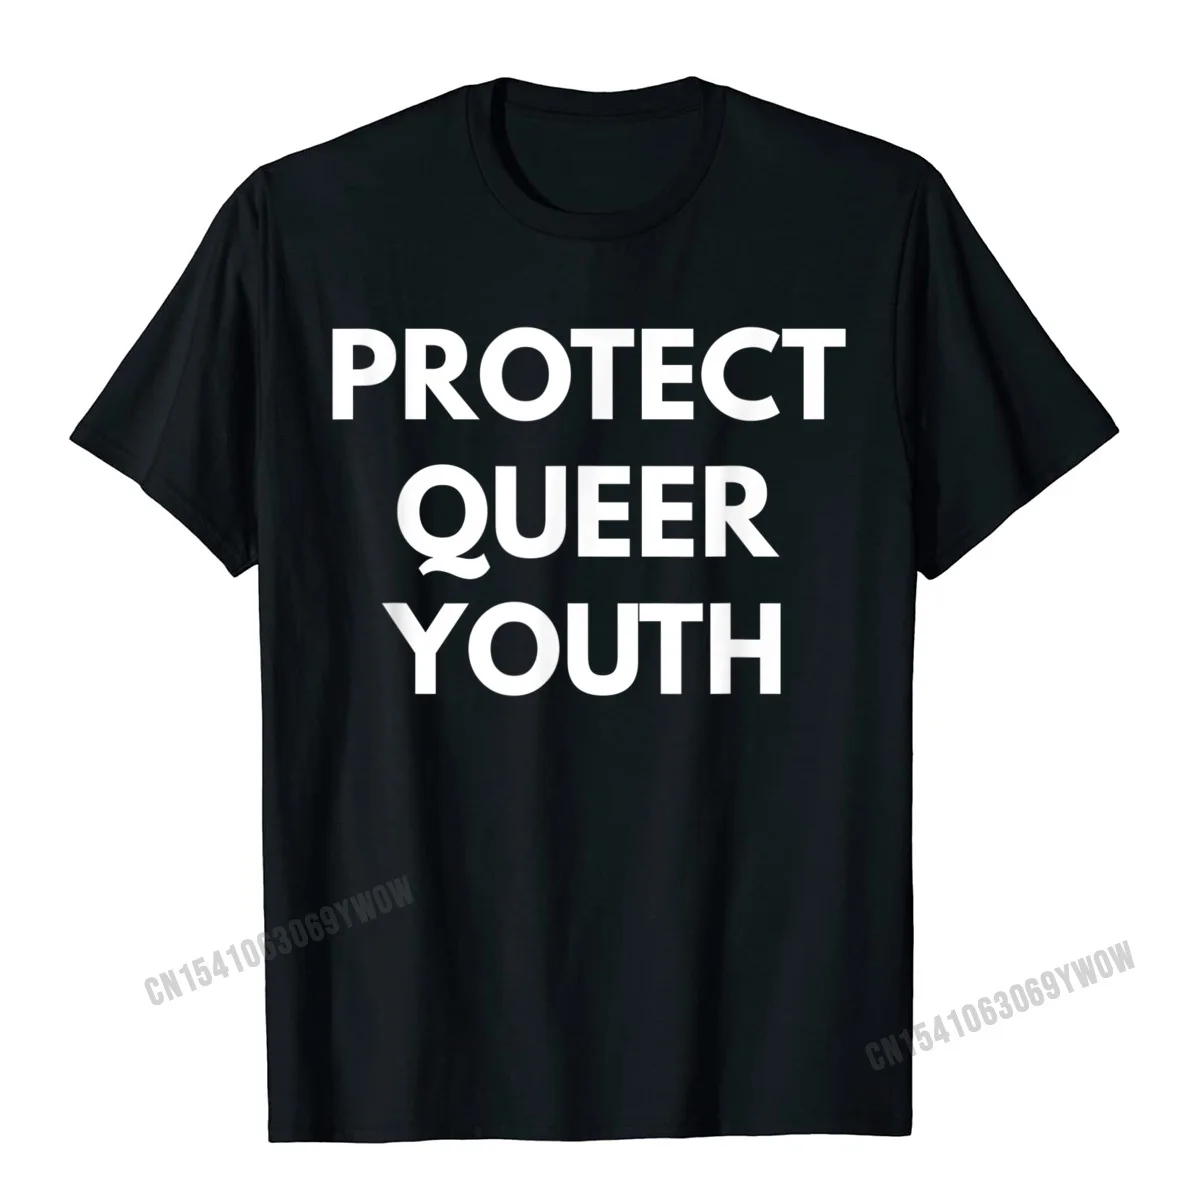 Tops & Tees Summer Tops Shirts Thanksgiving Day Prevailing Slim Fit Short Sleeve Pure Cotton Crew Neck Men Top T-shirts Slim Fit Protect Queer Youth t-shirt - LGBT Pride Shirts__403 black